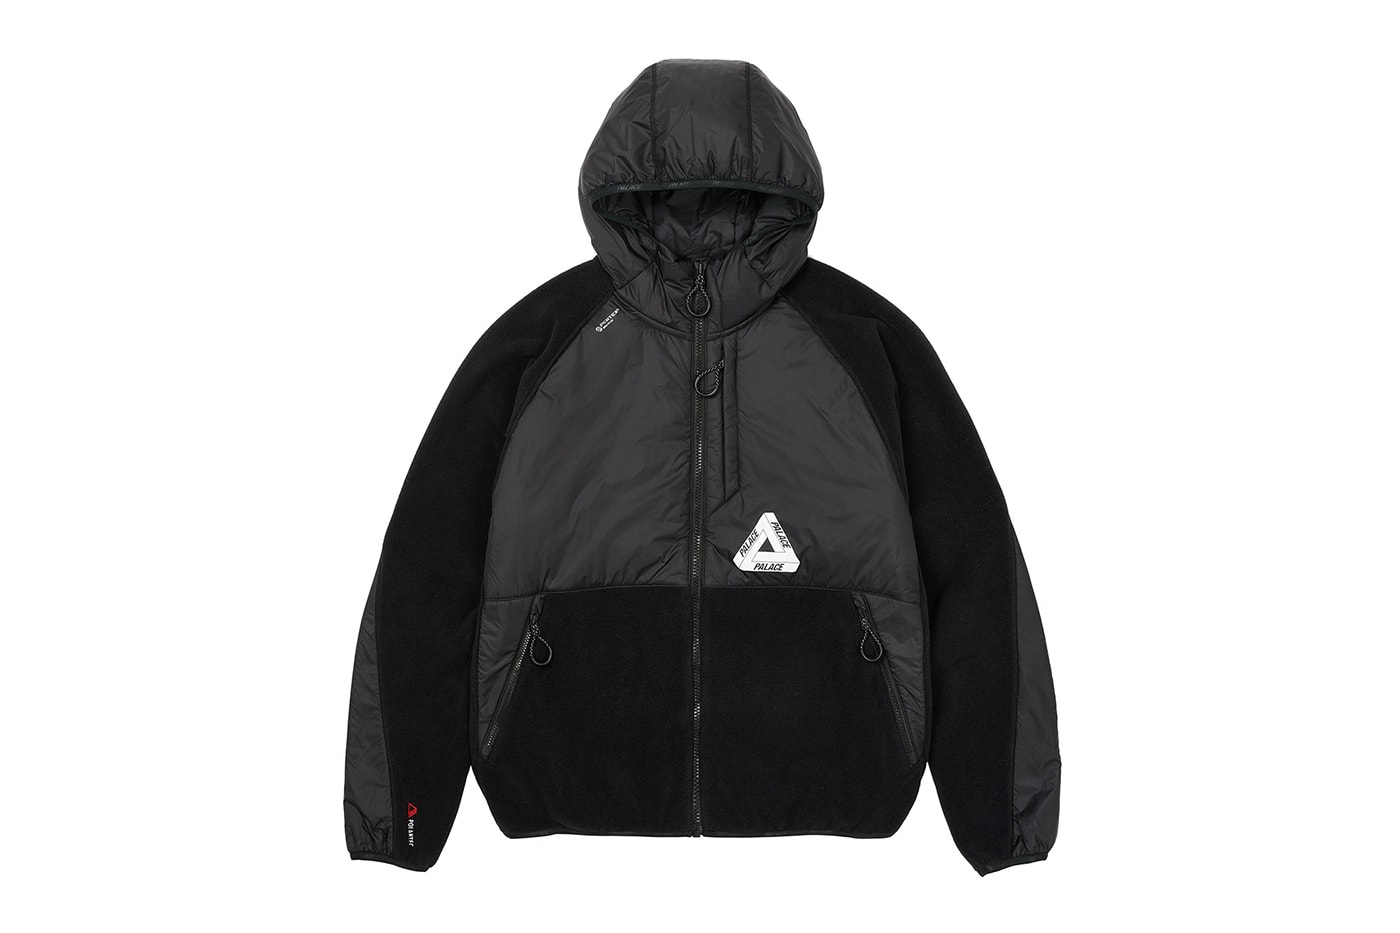 Palace Winter 2020 Tracksuits collection drop info